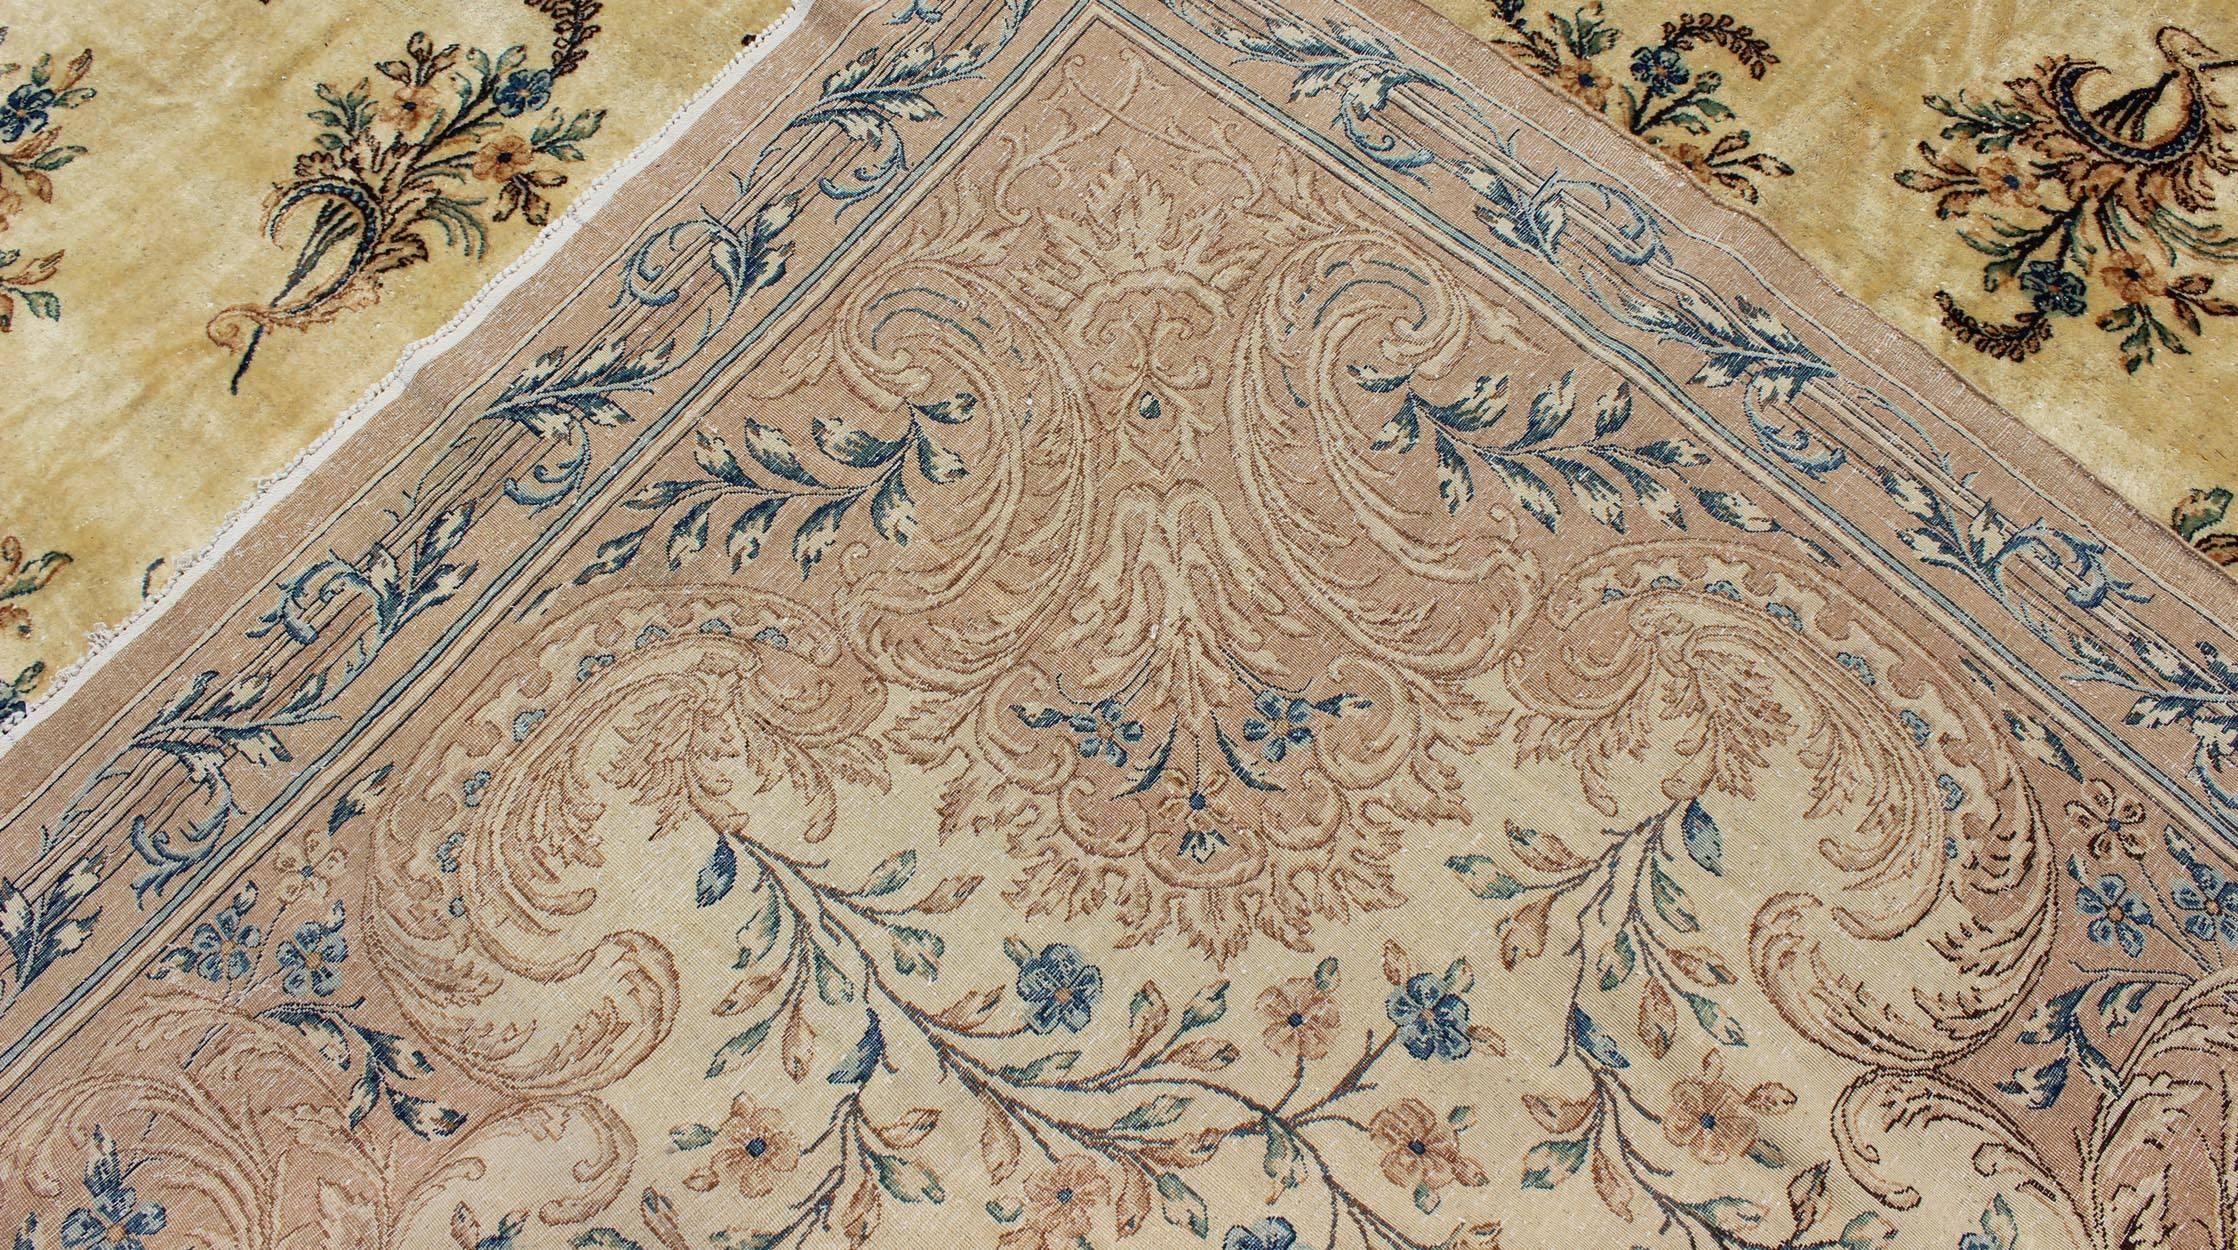 Early 20th Century Large Antique Lavar Kerman Rug with Blossoming Floral Motifs in Cream and Blue